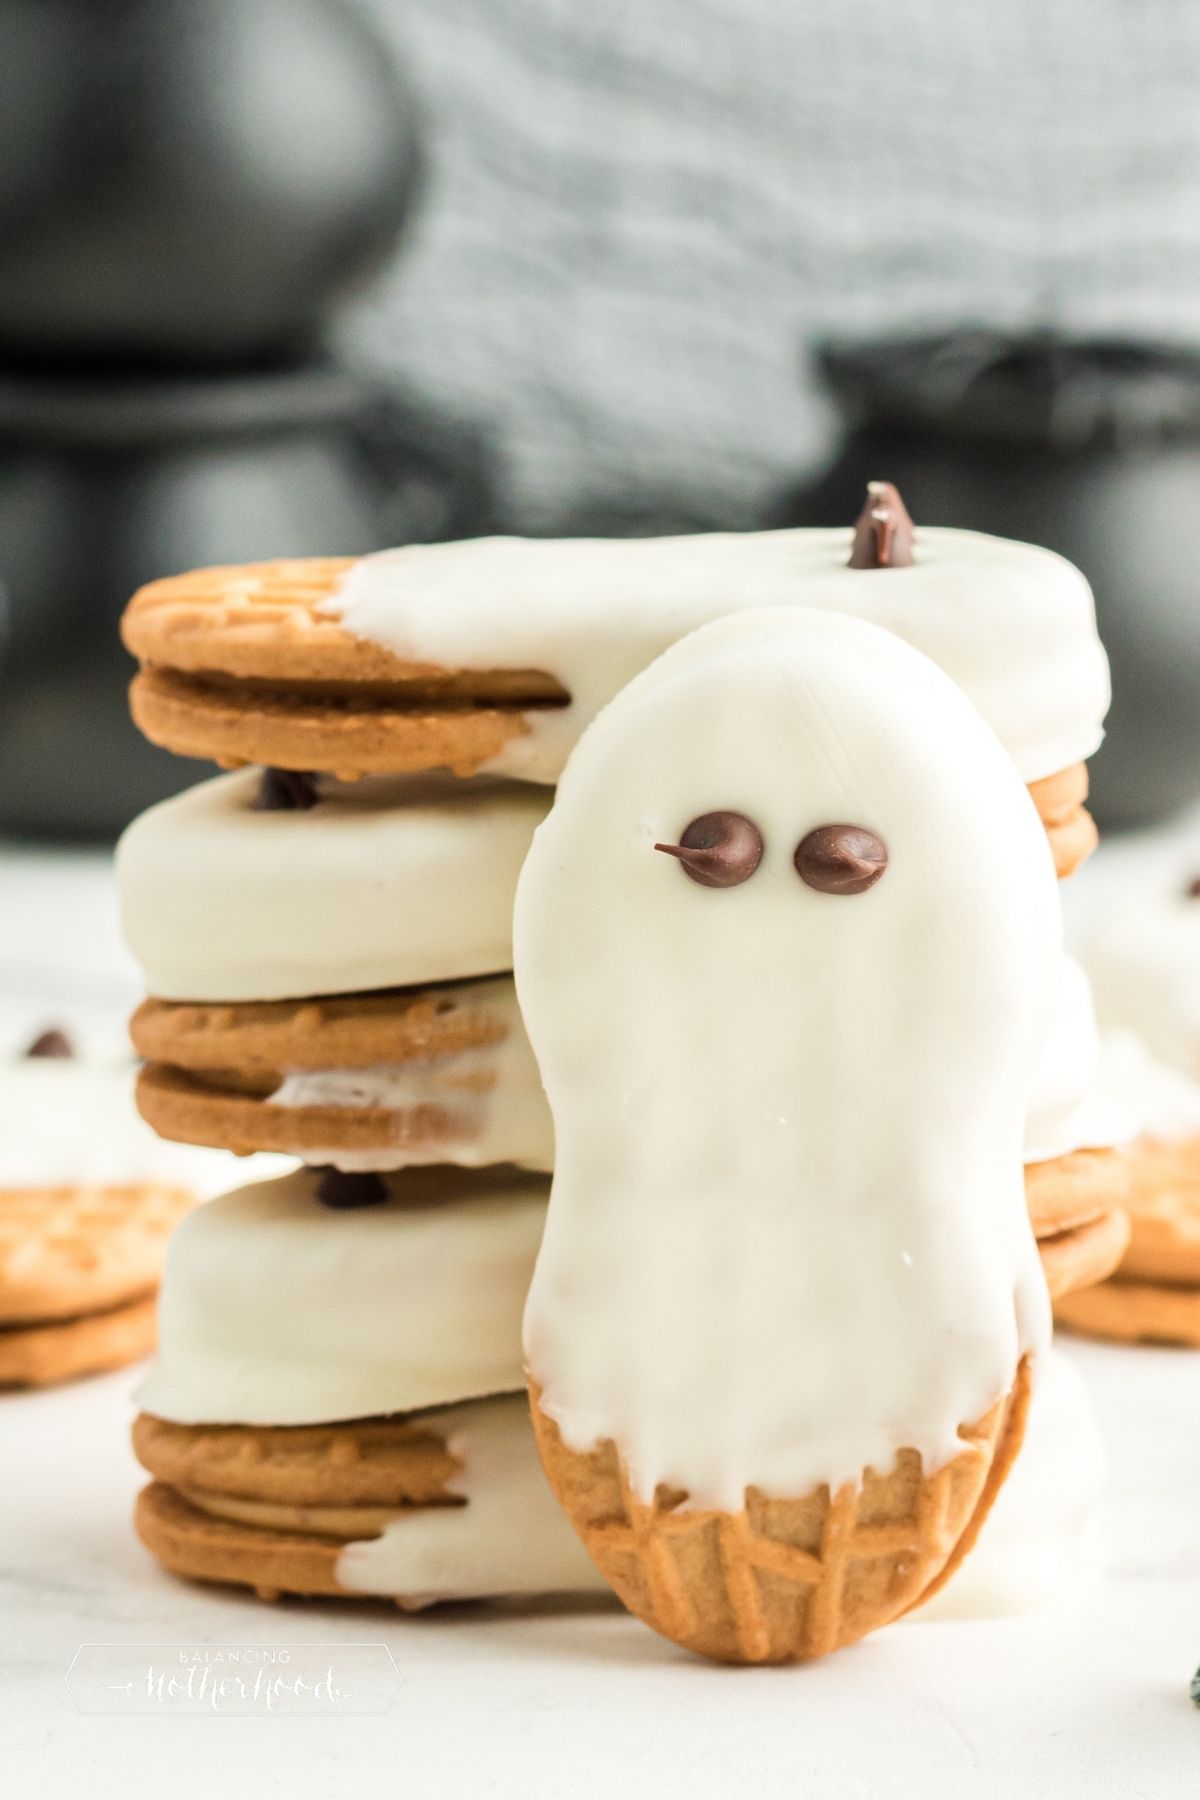 white chocolate covered Nutter Butter cookies stacked, one standing on end with chocolate eyes